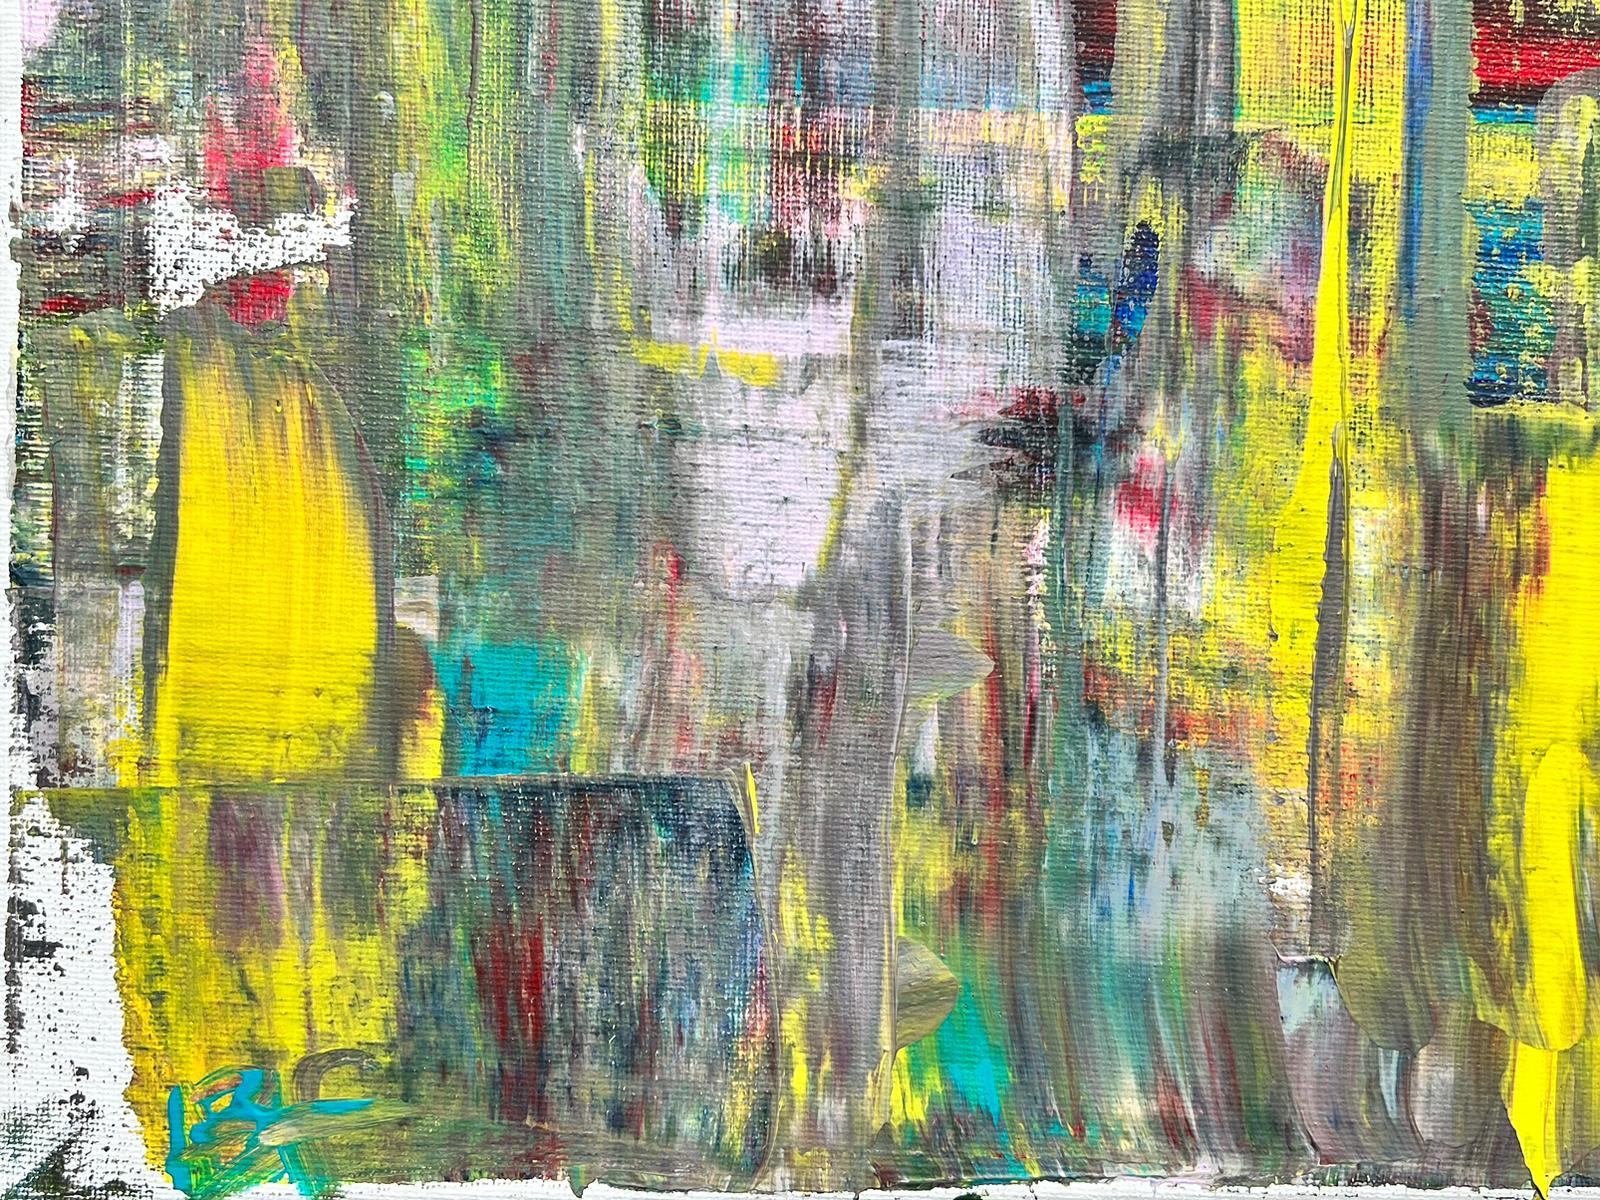 Thick Abstract
by Bolly Frost
Acrylic painting on canvas 
signed
painting: 18 x 20 inches  

Superb original modern abstract portrait painting by the rising contemporary British painter, Bolly Frost . Incredible infusion of colours, blurred together